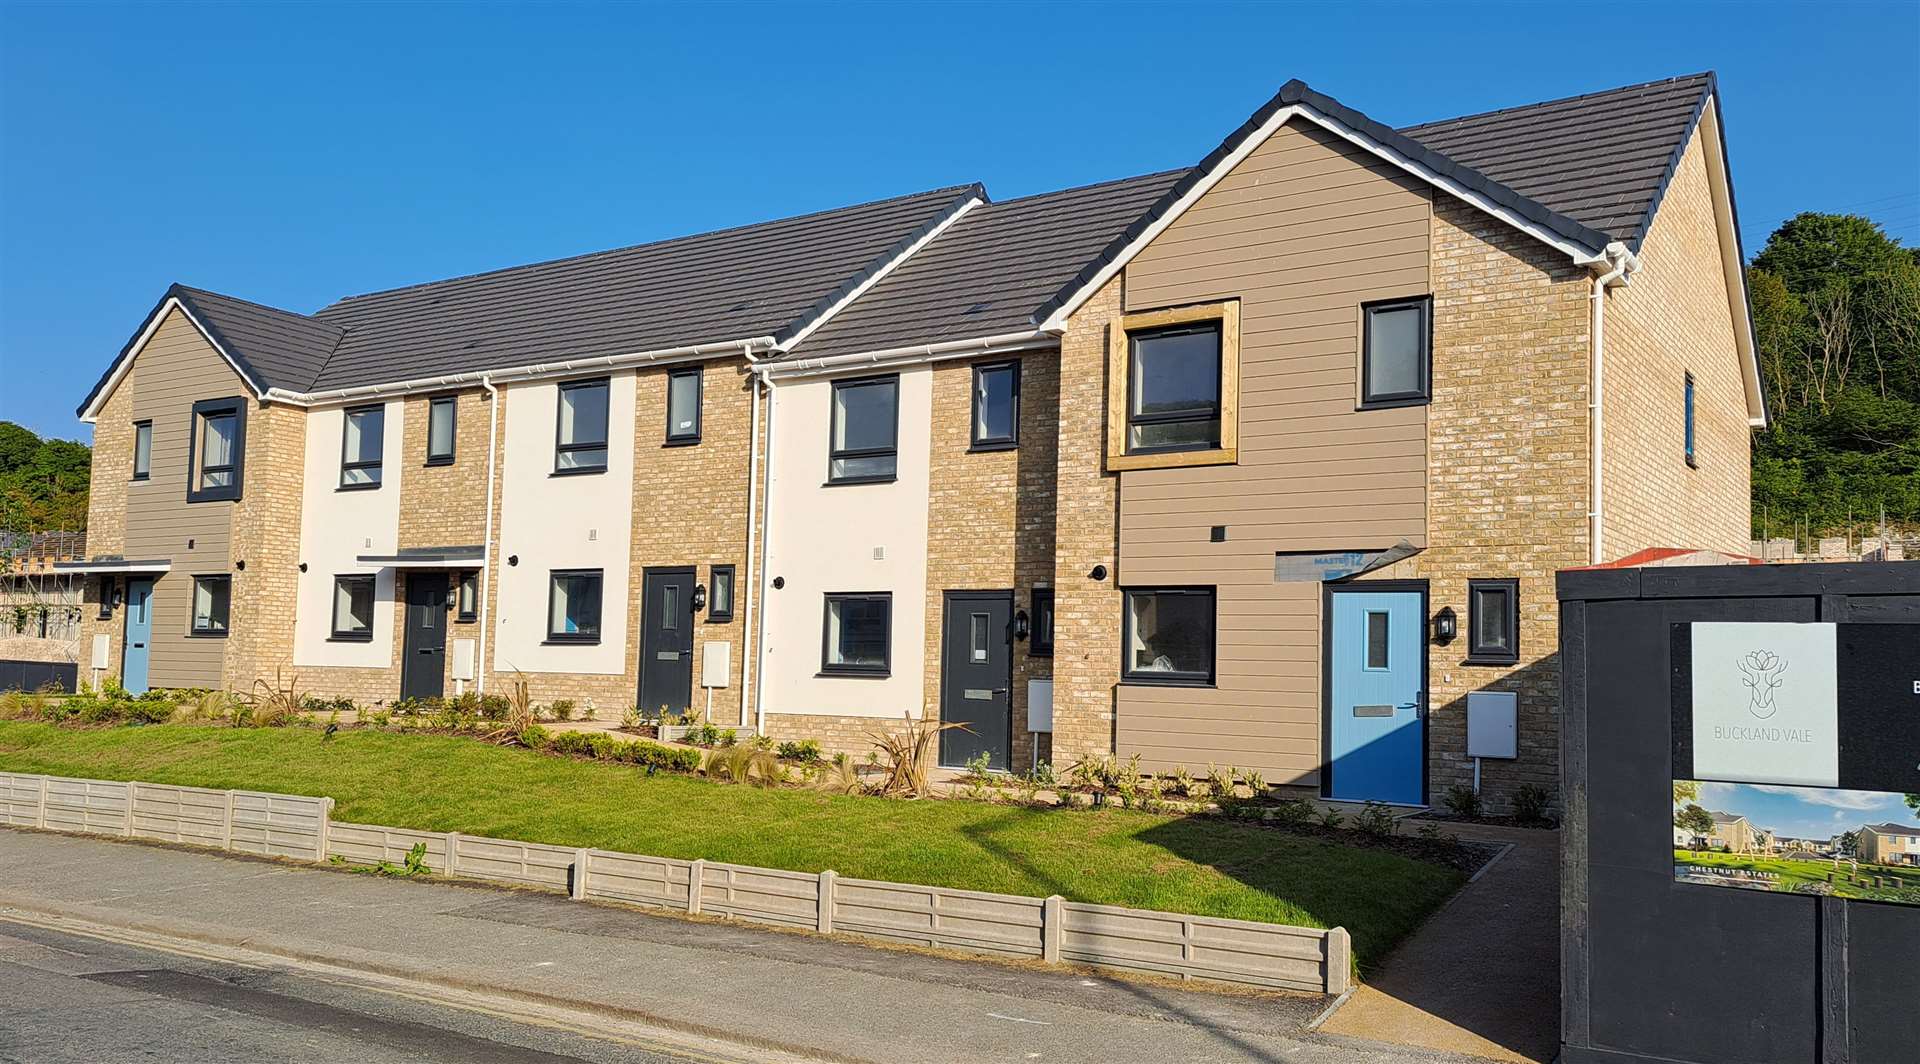 Five new houses are already built on the former Buckland Hospital site